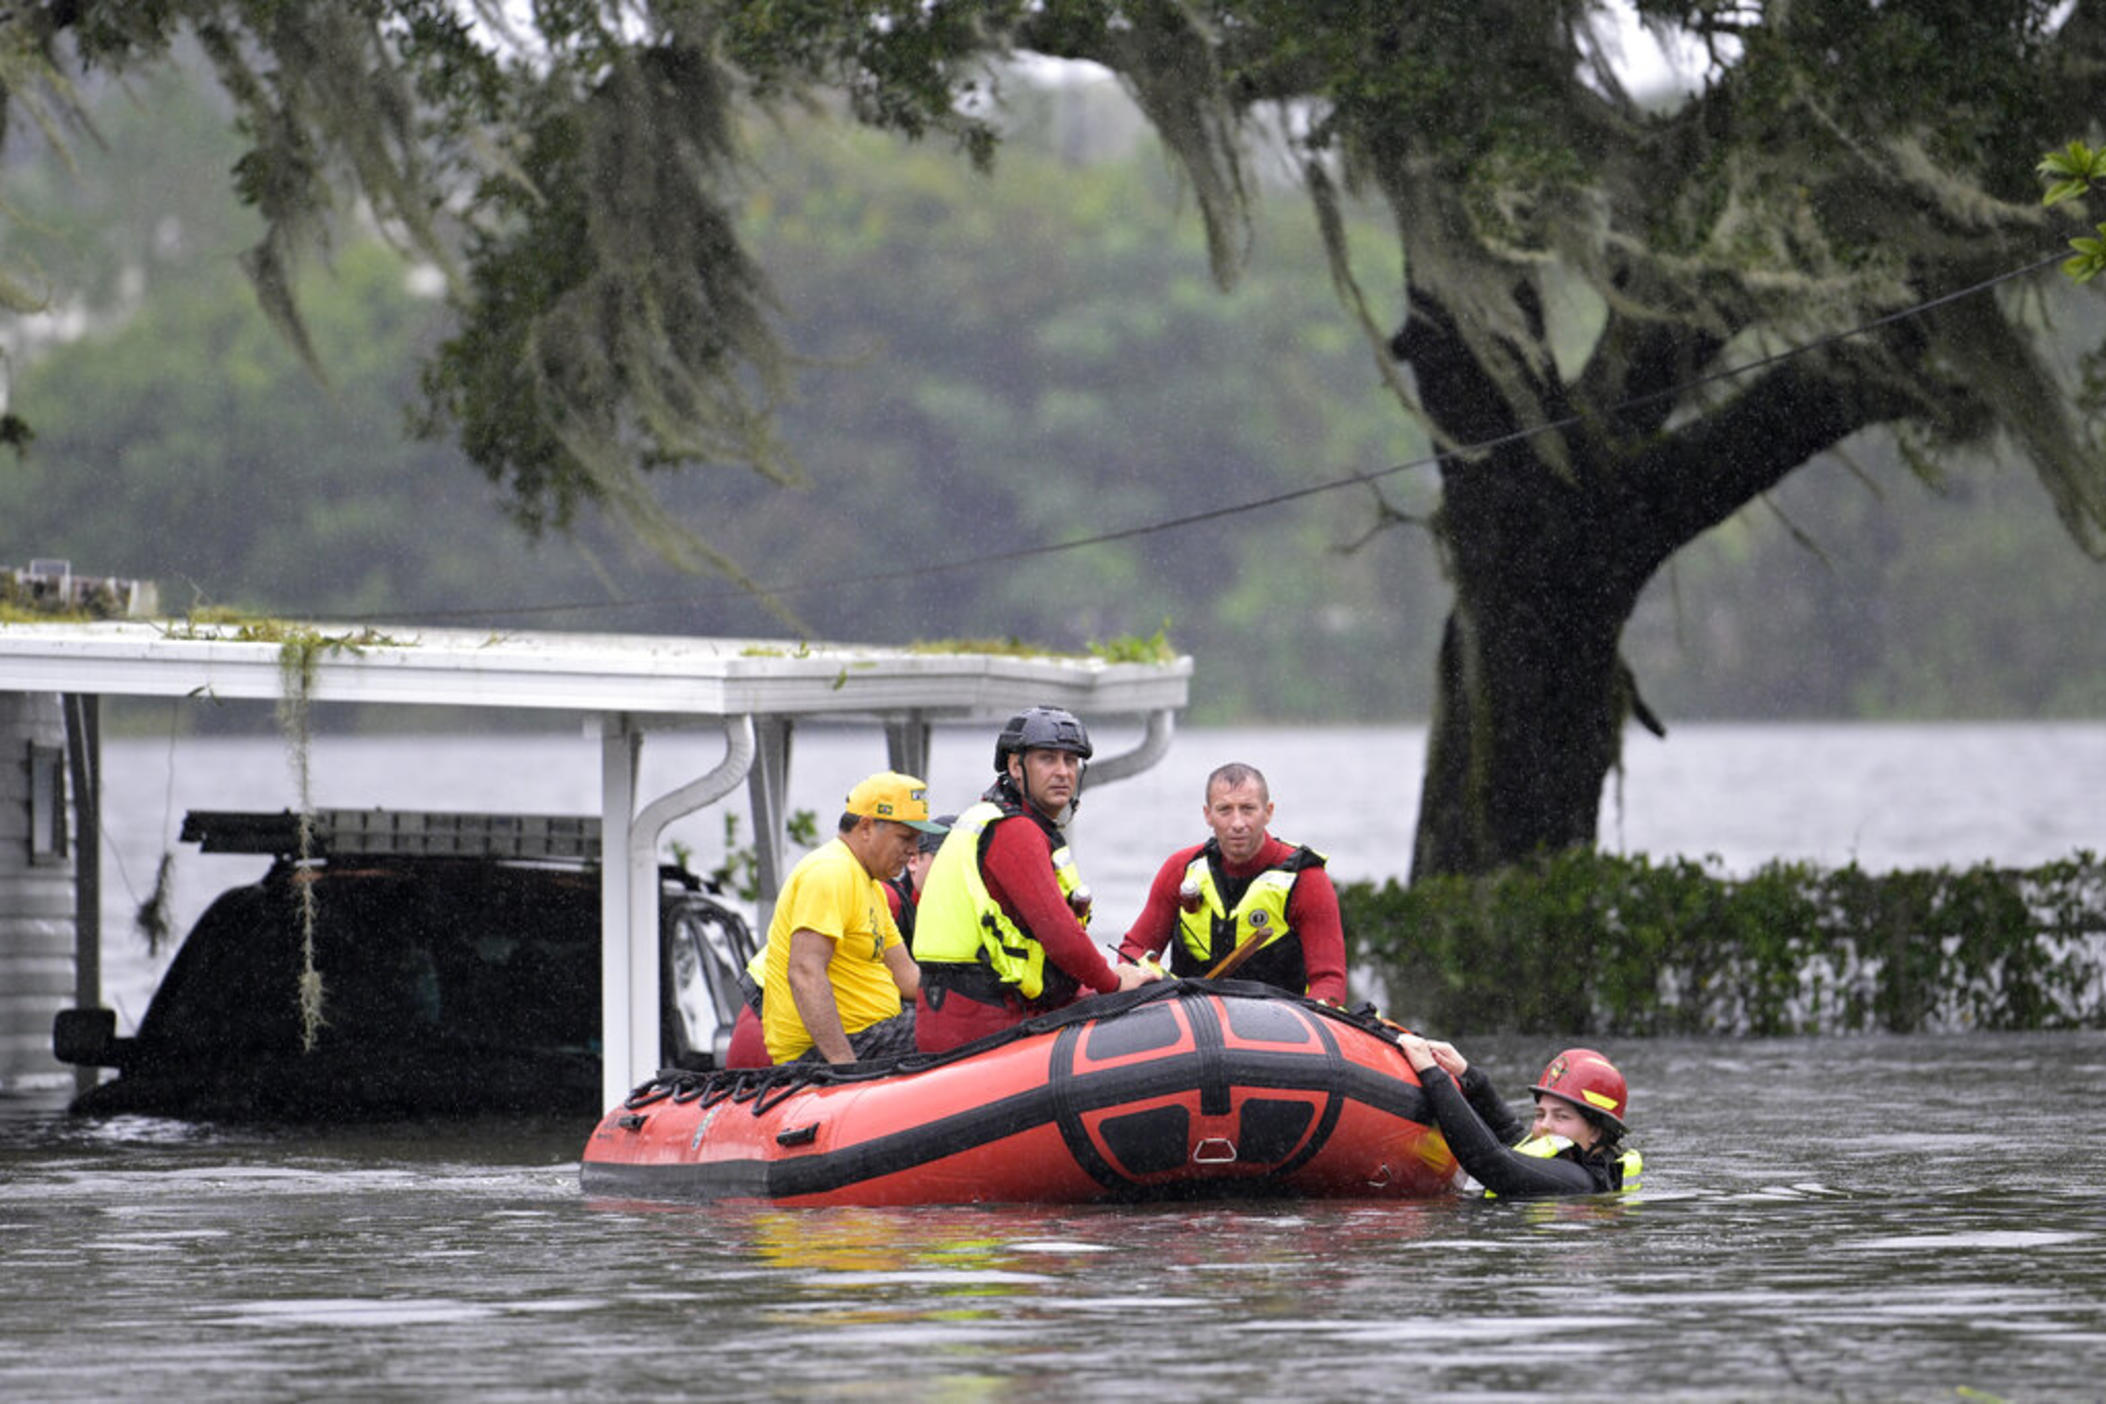 First responders with Orange County Fire Rescue use an inflatable boat to rescue a resident from a home in the aftermath of Hurricane Ian, Thursday, Sept. 29, 2022, in Orlando, Fla.